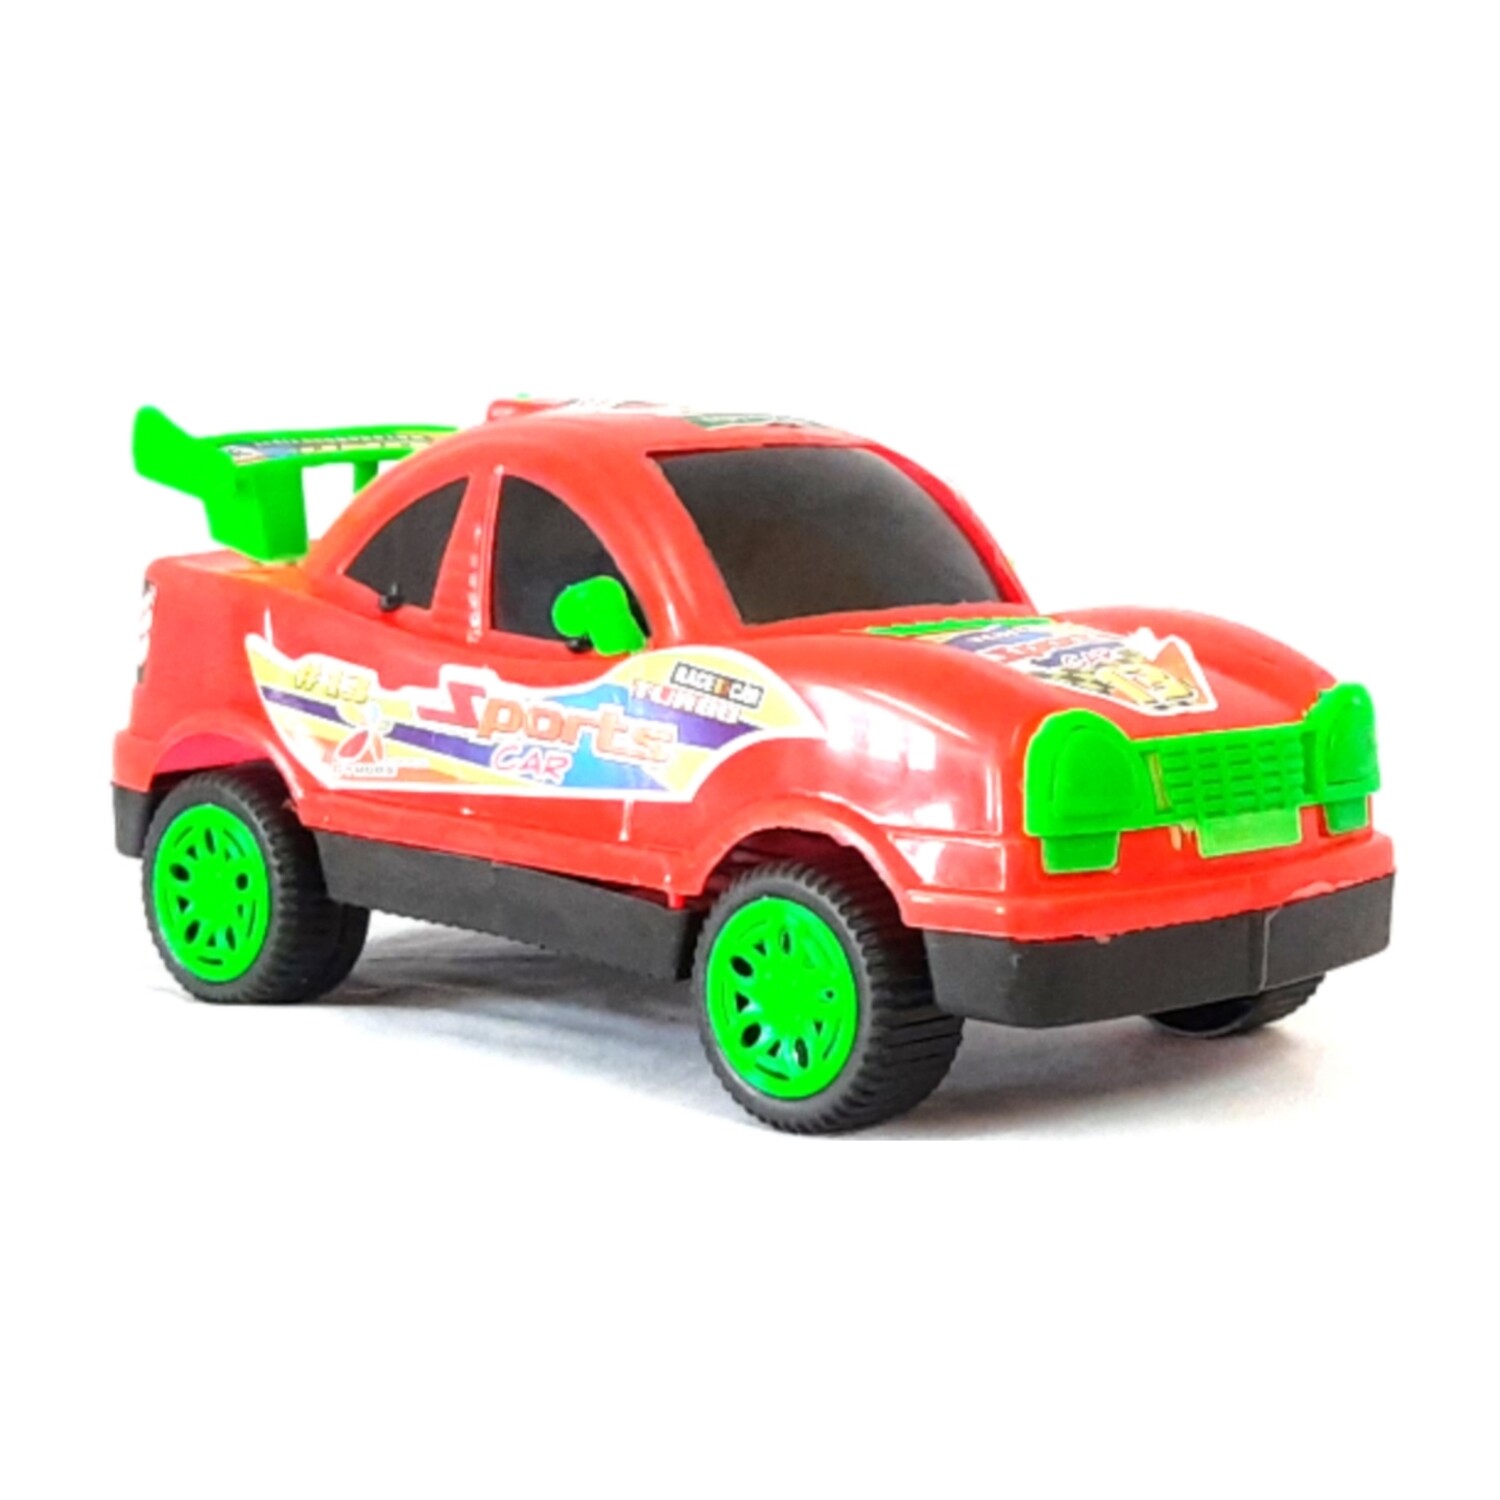 Play Time Race Car Turbo Sports Car for Kids, Push n go Friction Powered Racing car for Kids